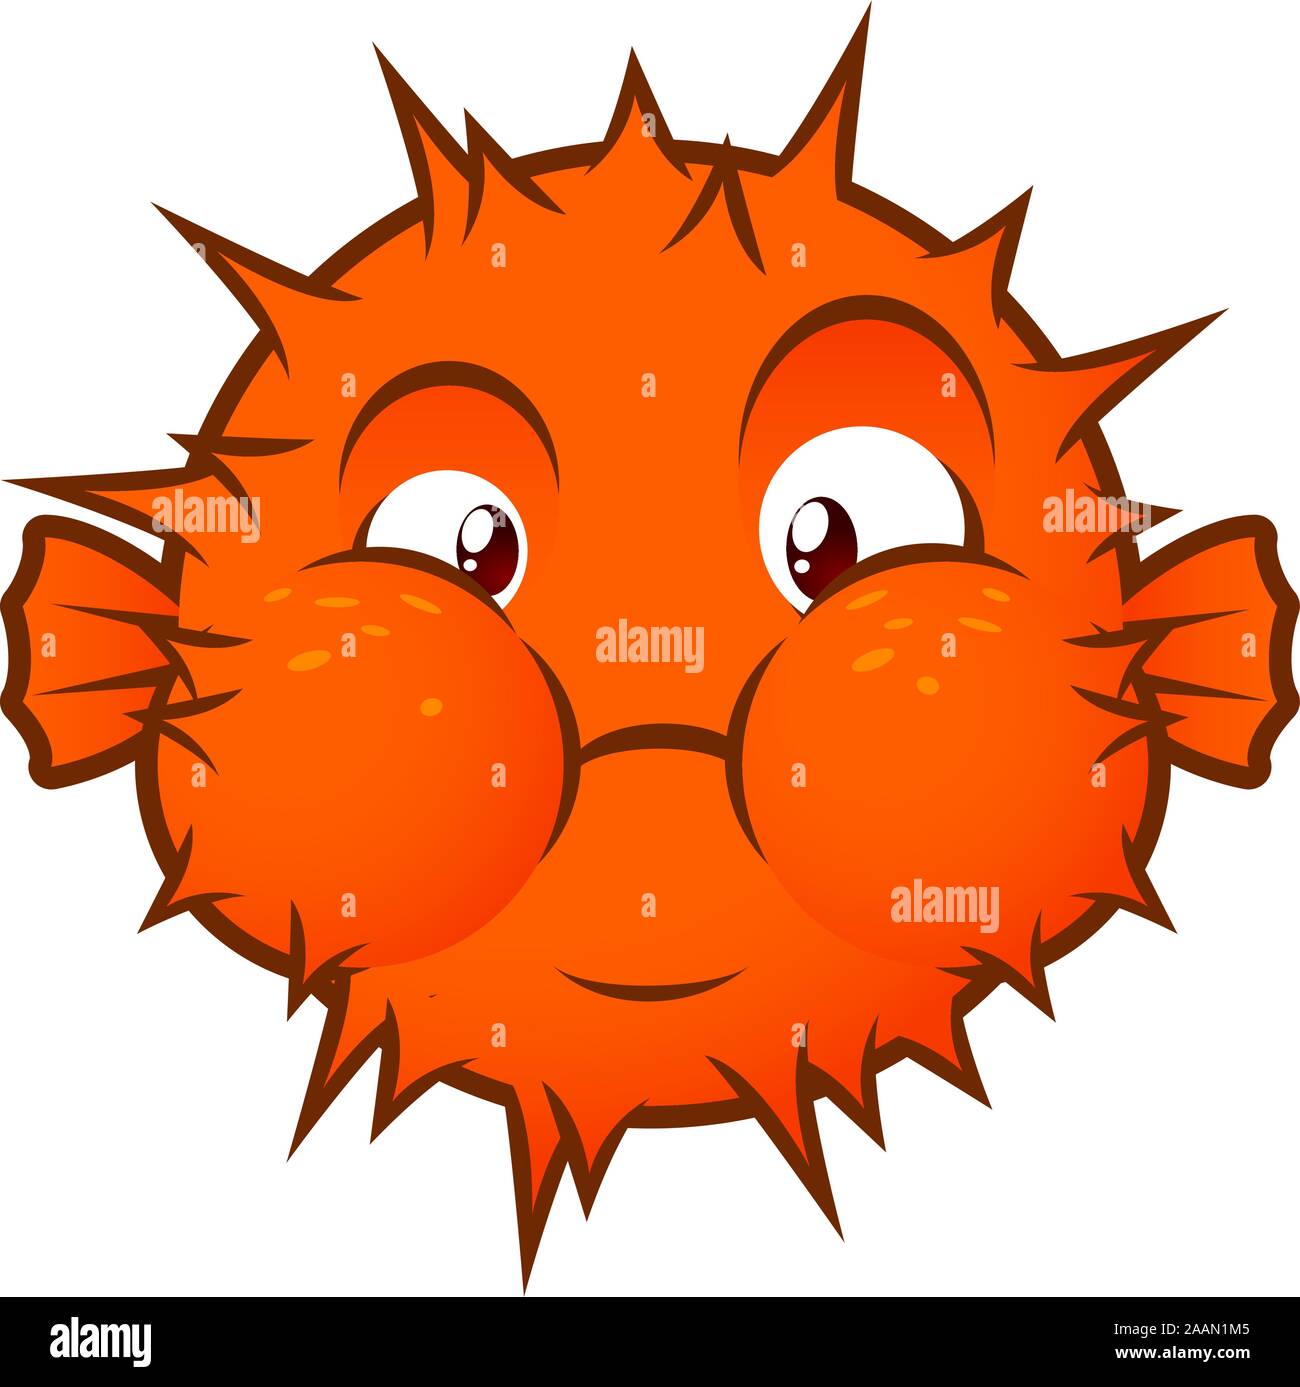 Fish balloon Stock Vector Images - Alamy